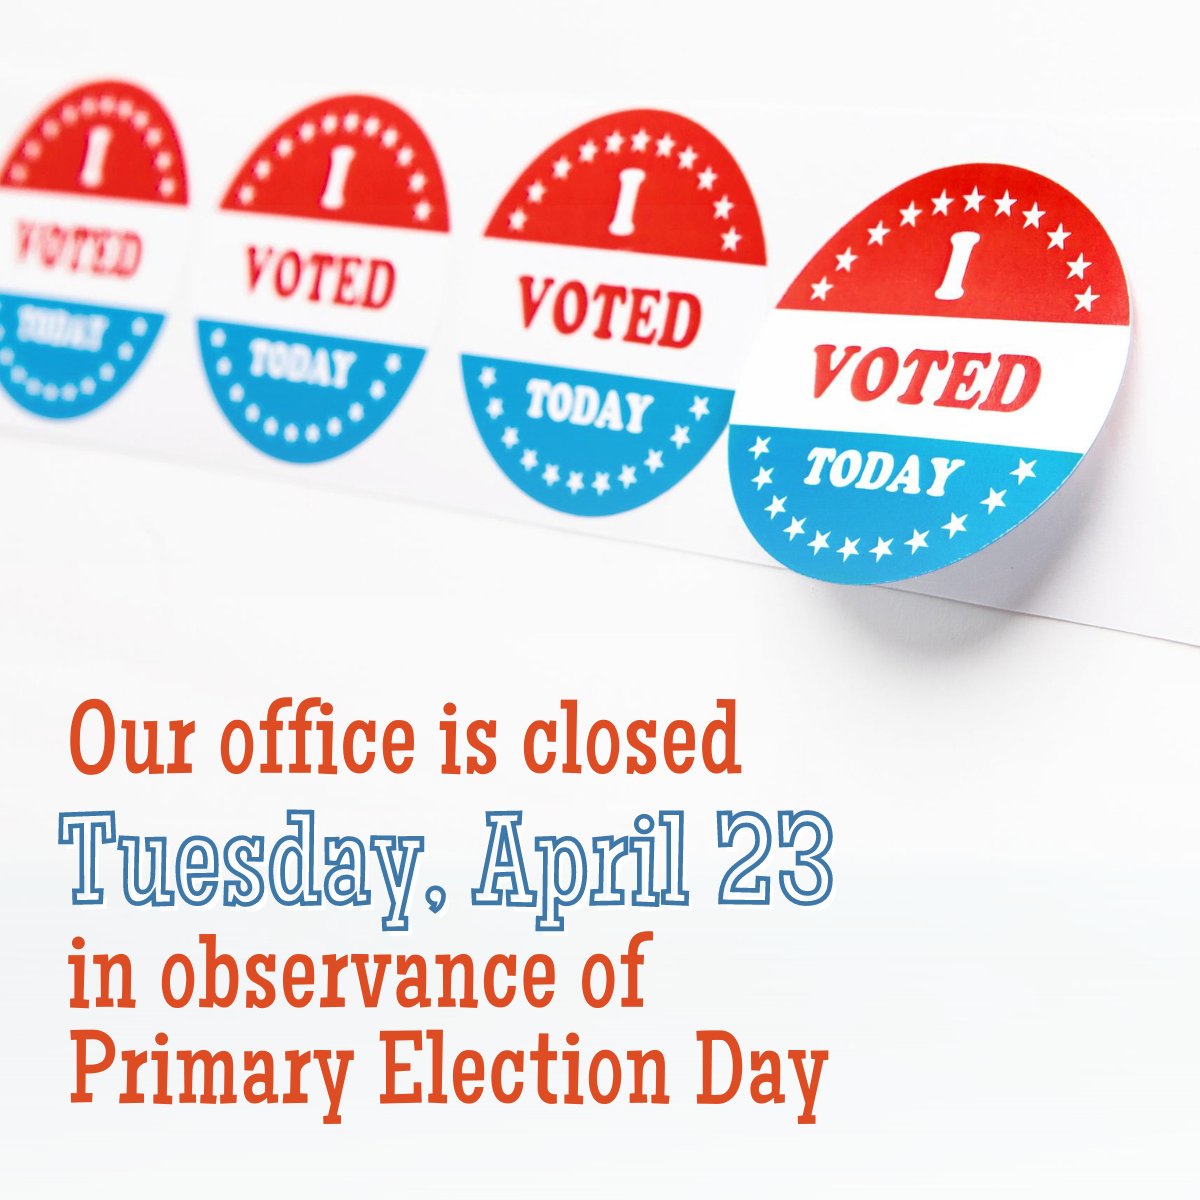 In observance of Primary Election Day, my district office will be closed on Tuesday, April 23rd. We will reopen on Wednesday, April 24th during regular business hours. Happy voting!